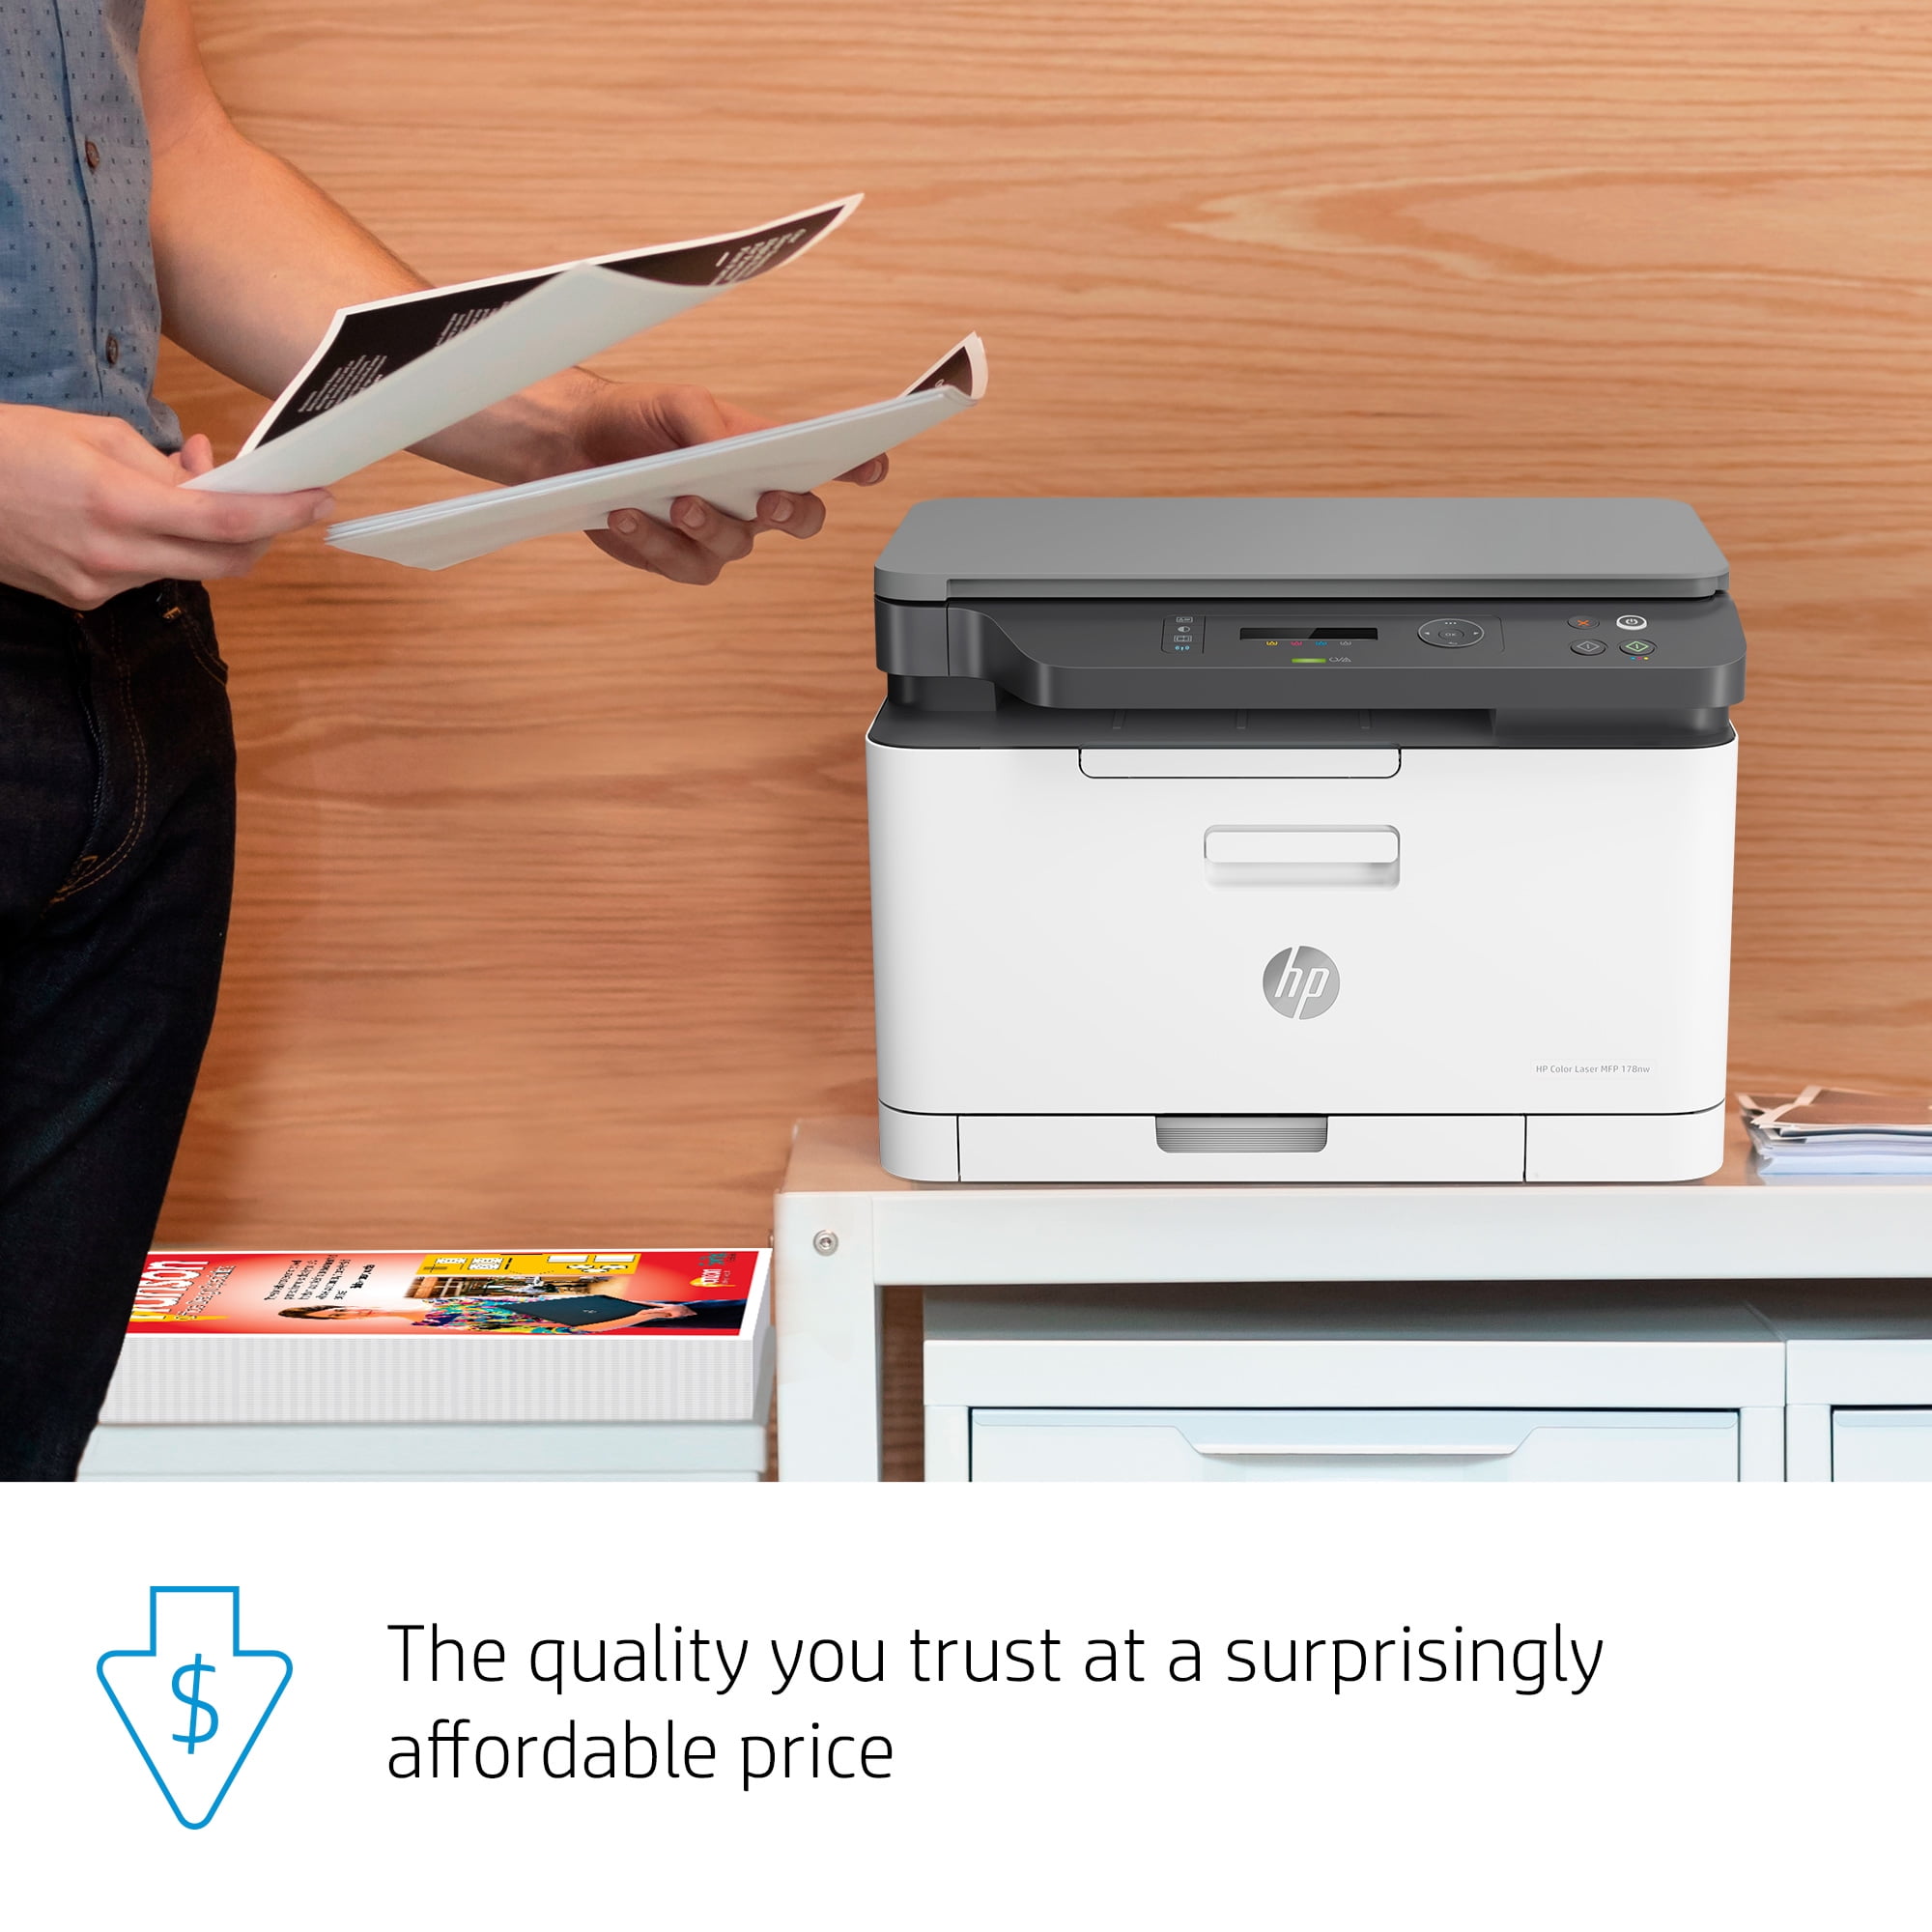 HP Color Laser MFP 178nw Wireless All in One Laser Printer, 4ZB96A